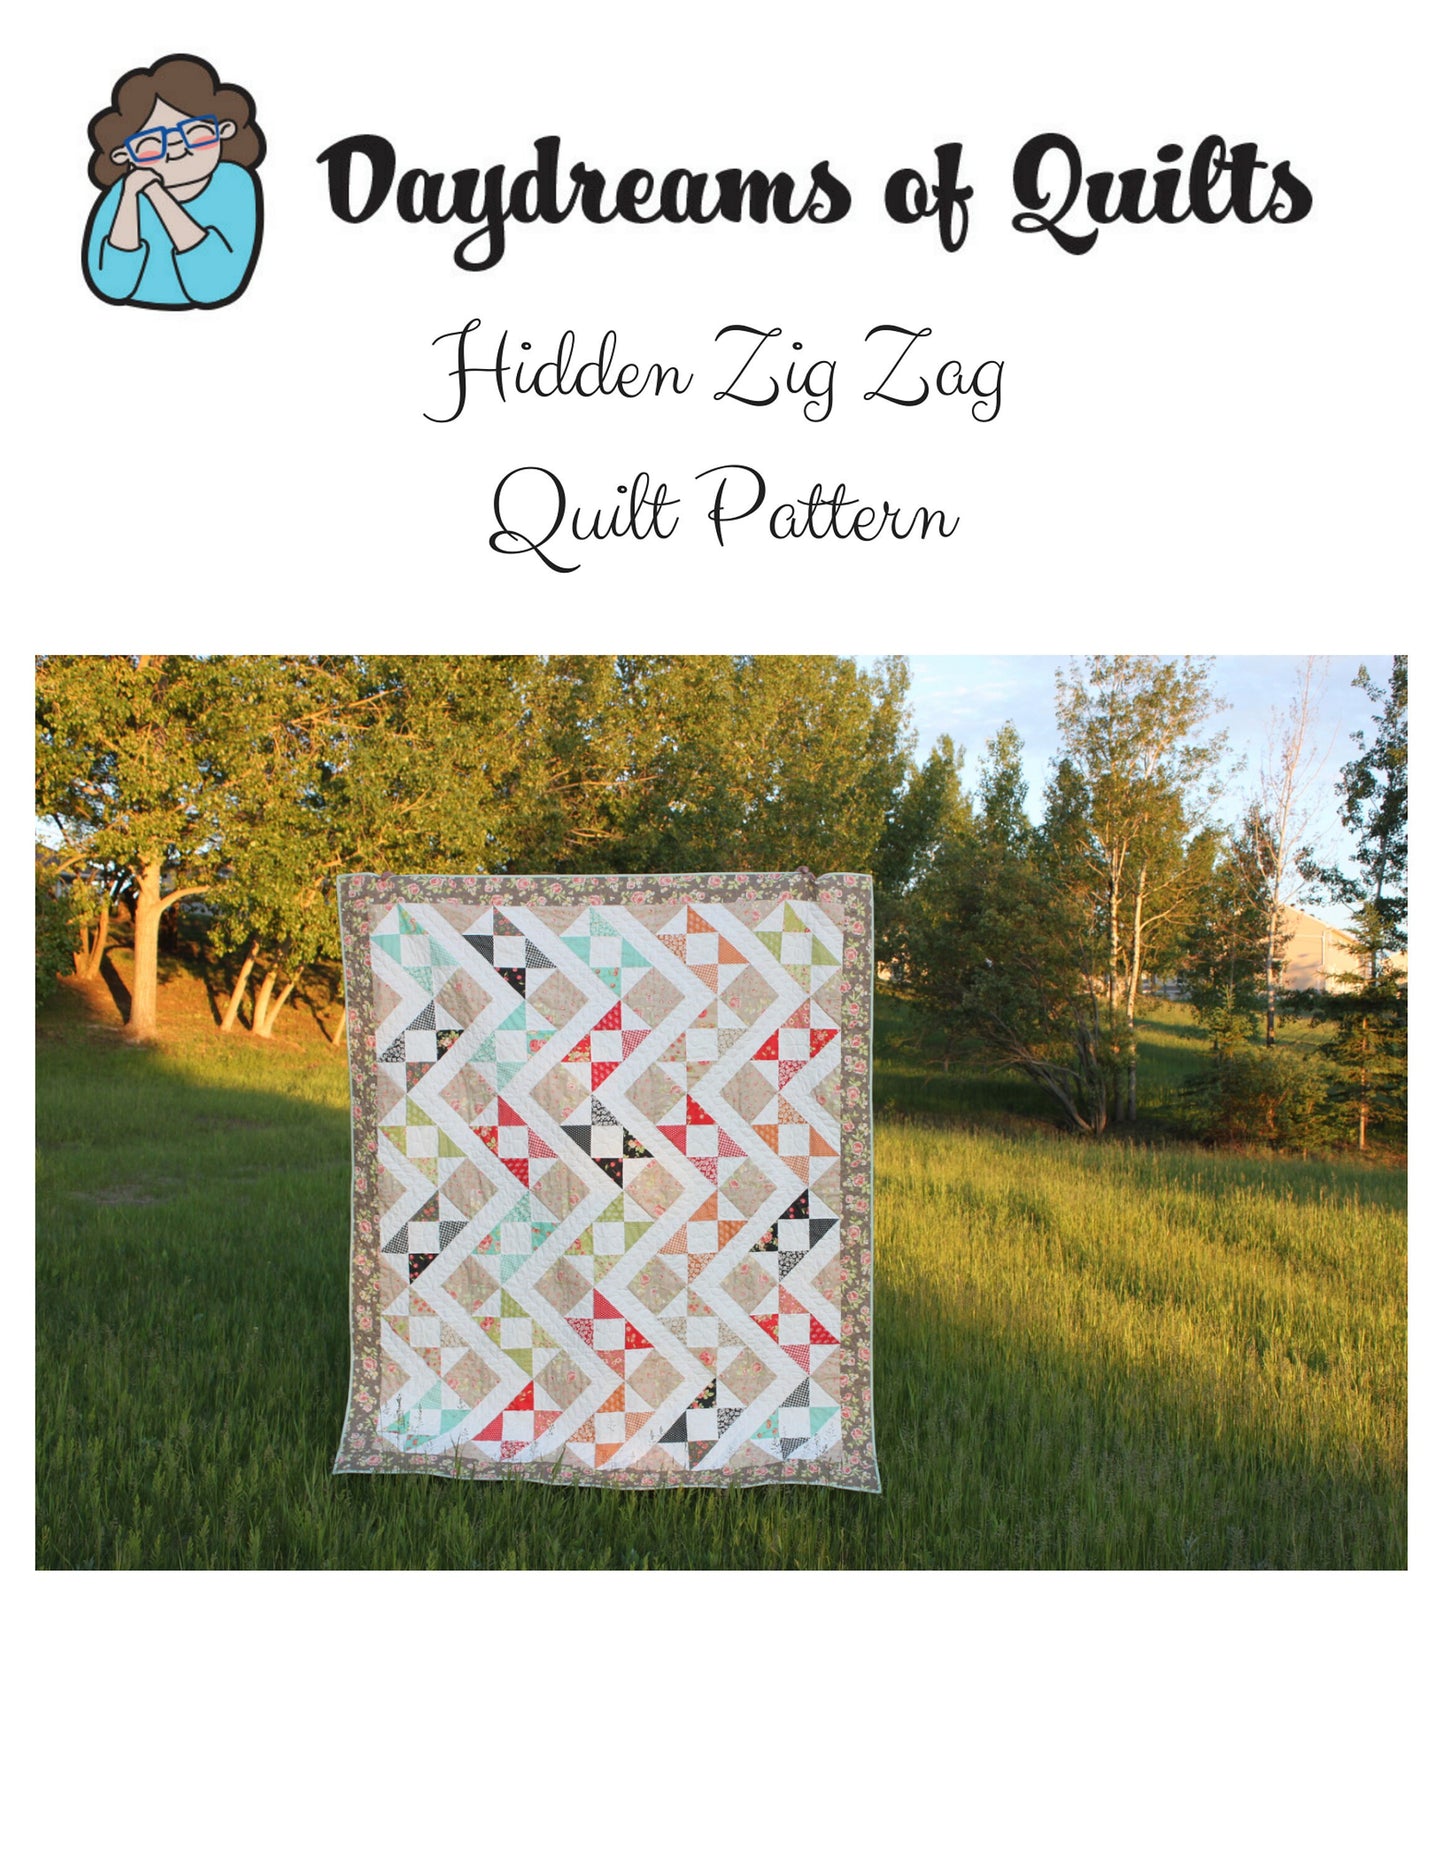 Charm square quilt pattern, charm pack pattern, Hidden Zig Zag Quilt pattern, pdf quilt pattern, half square triangle quilt pattern